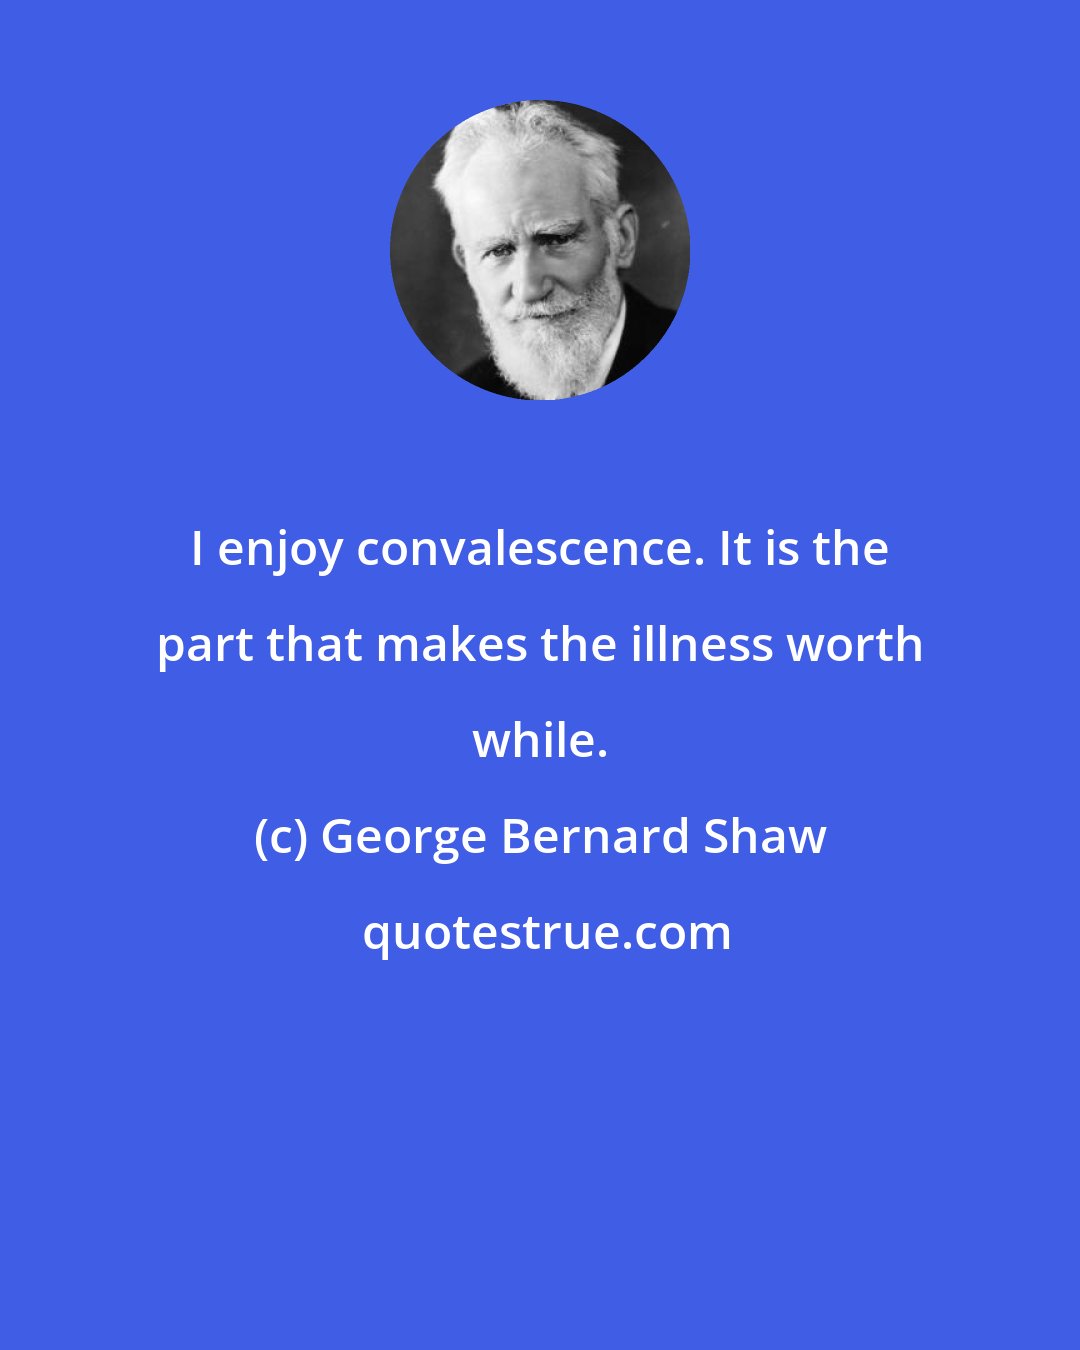 George Bernard Shaw: I enjoy convalescence. It is the part that makes the illness worth while.